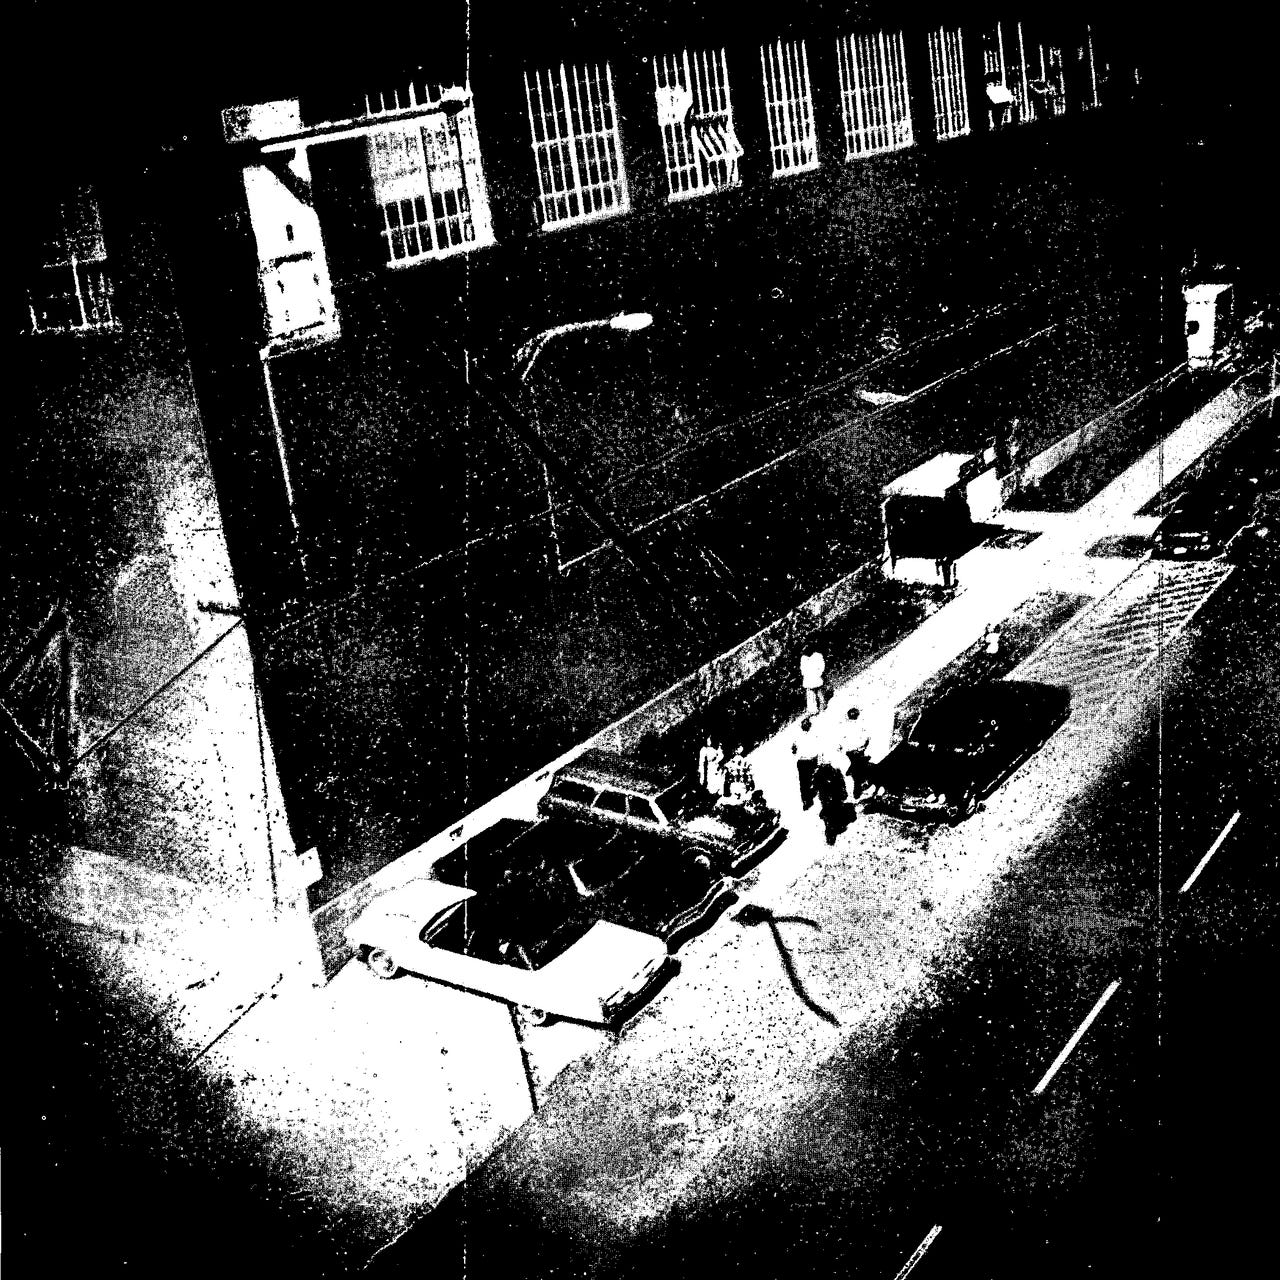 Surveillance photos taken by the CIA's smallest spies captured employees in the Washington Navy Yard parking lot.